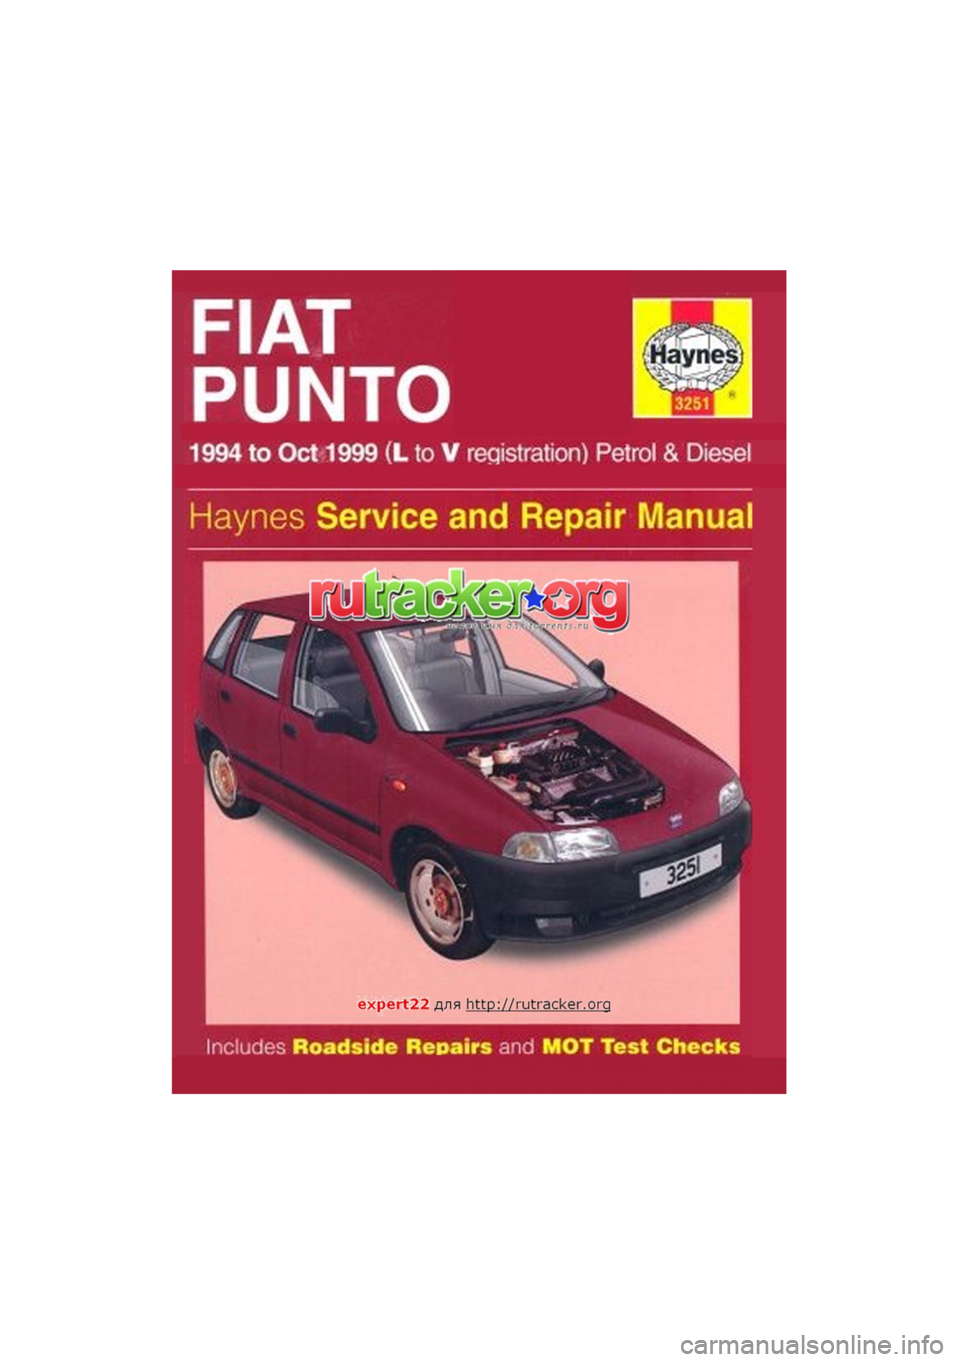 FIAT PUNTO 1996 176 / 1.G Workshop Manual 
FIAT 
PUNTO 
1994 to Oct 1999 (L to V registration) Petrol & Diesel 
Haynes Service and Repair Manual 
expert22 fl/ia http://rutracker.org 
Includes Roadside Repairs and MOT Test Checks  